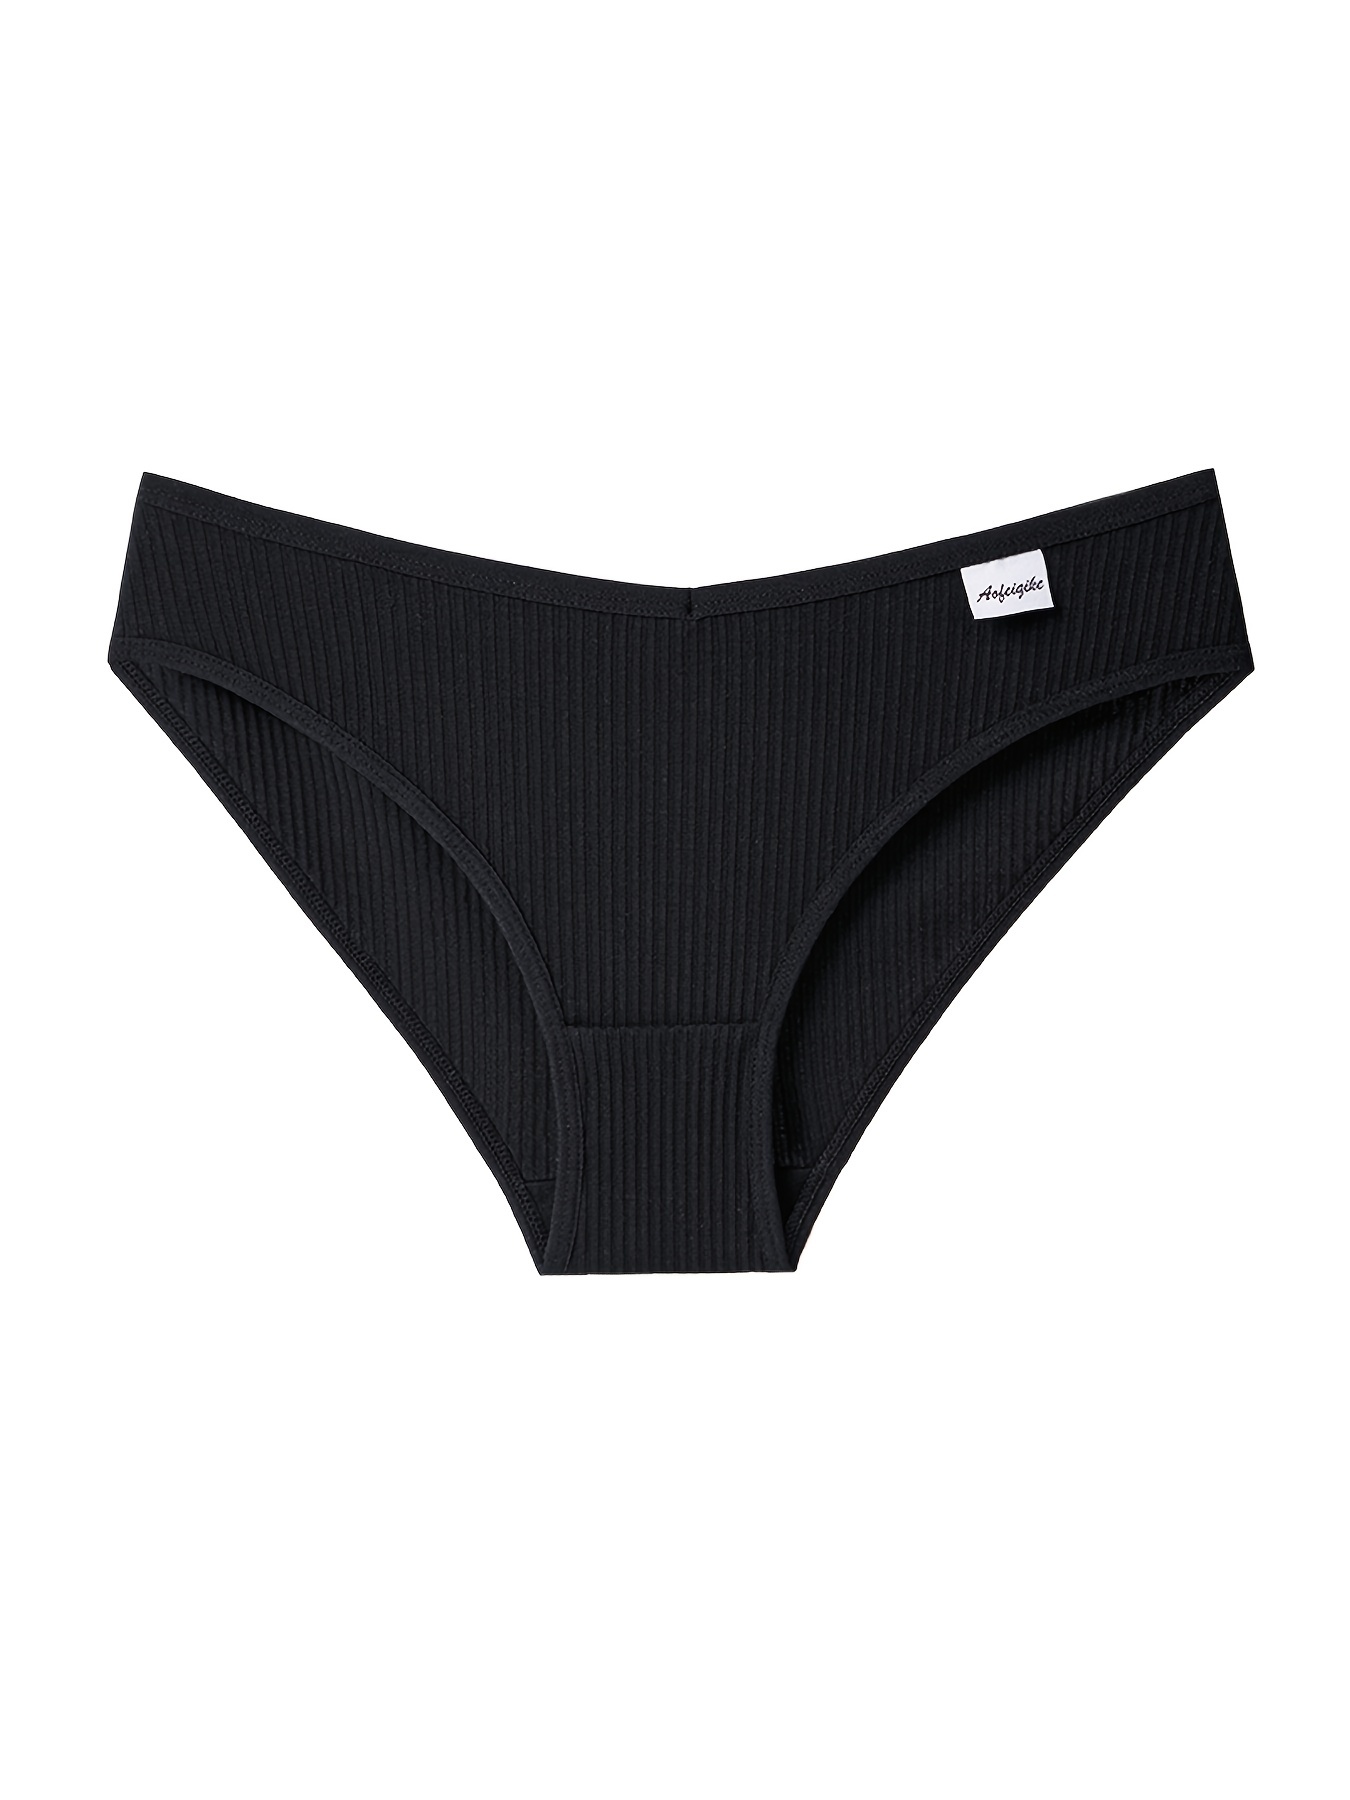 Black Comfortable Seamless Basic Panties Mid Waisted Undies for